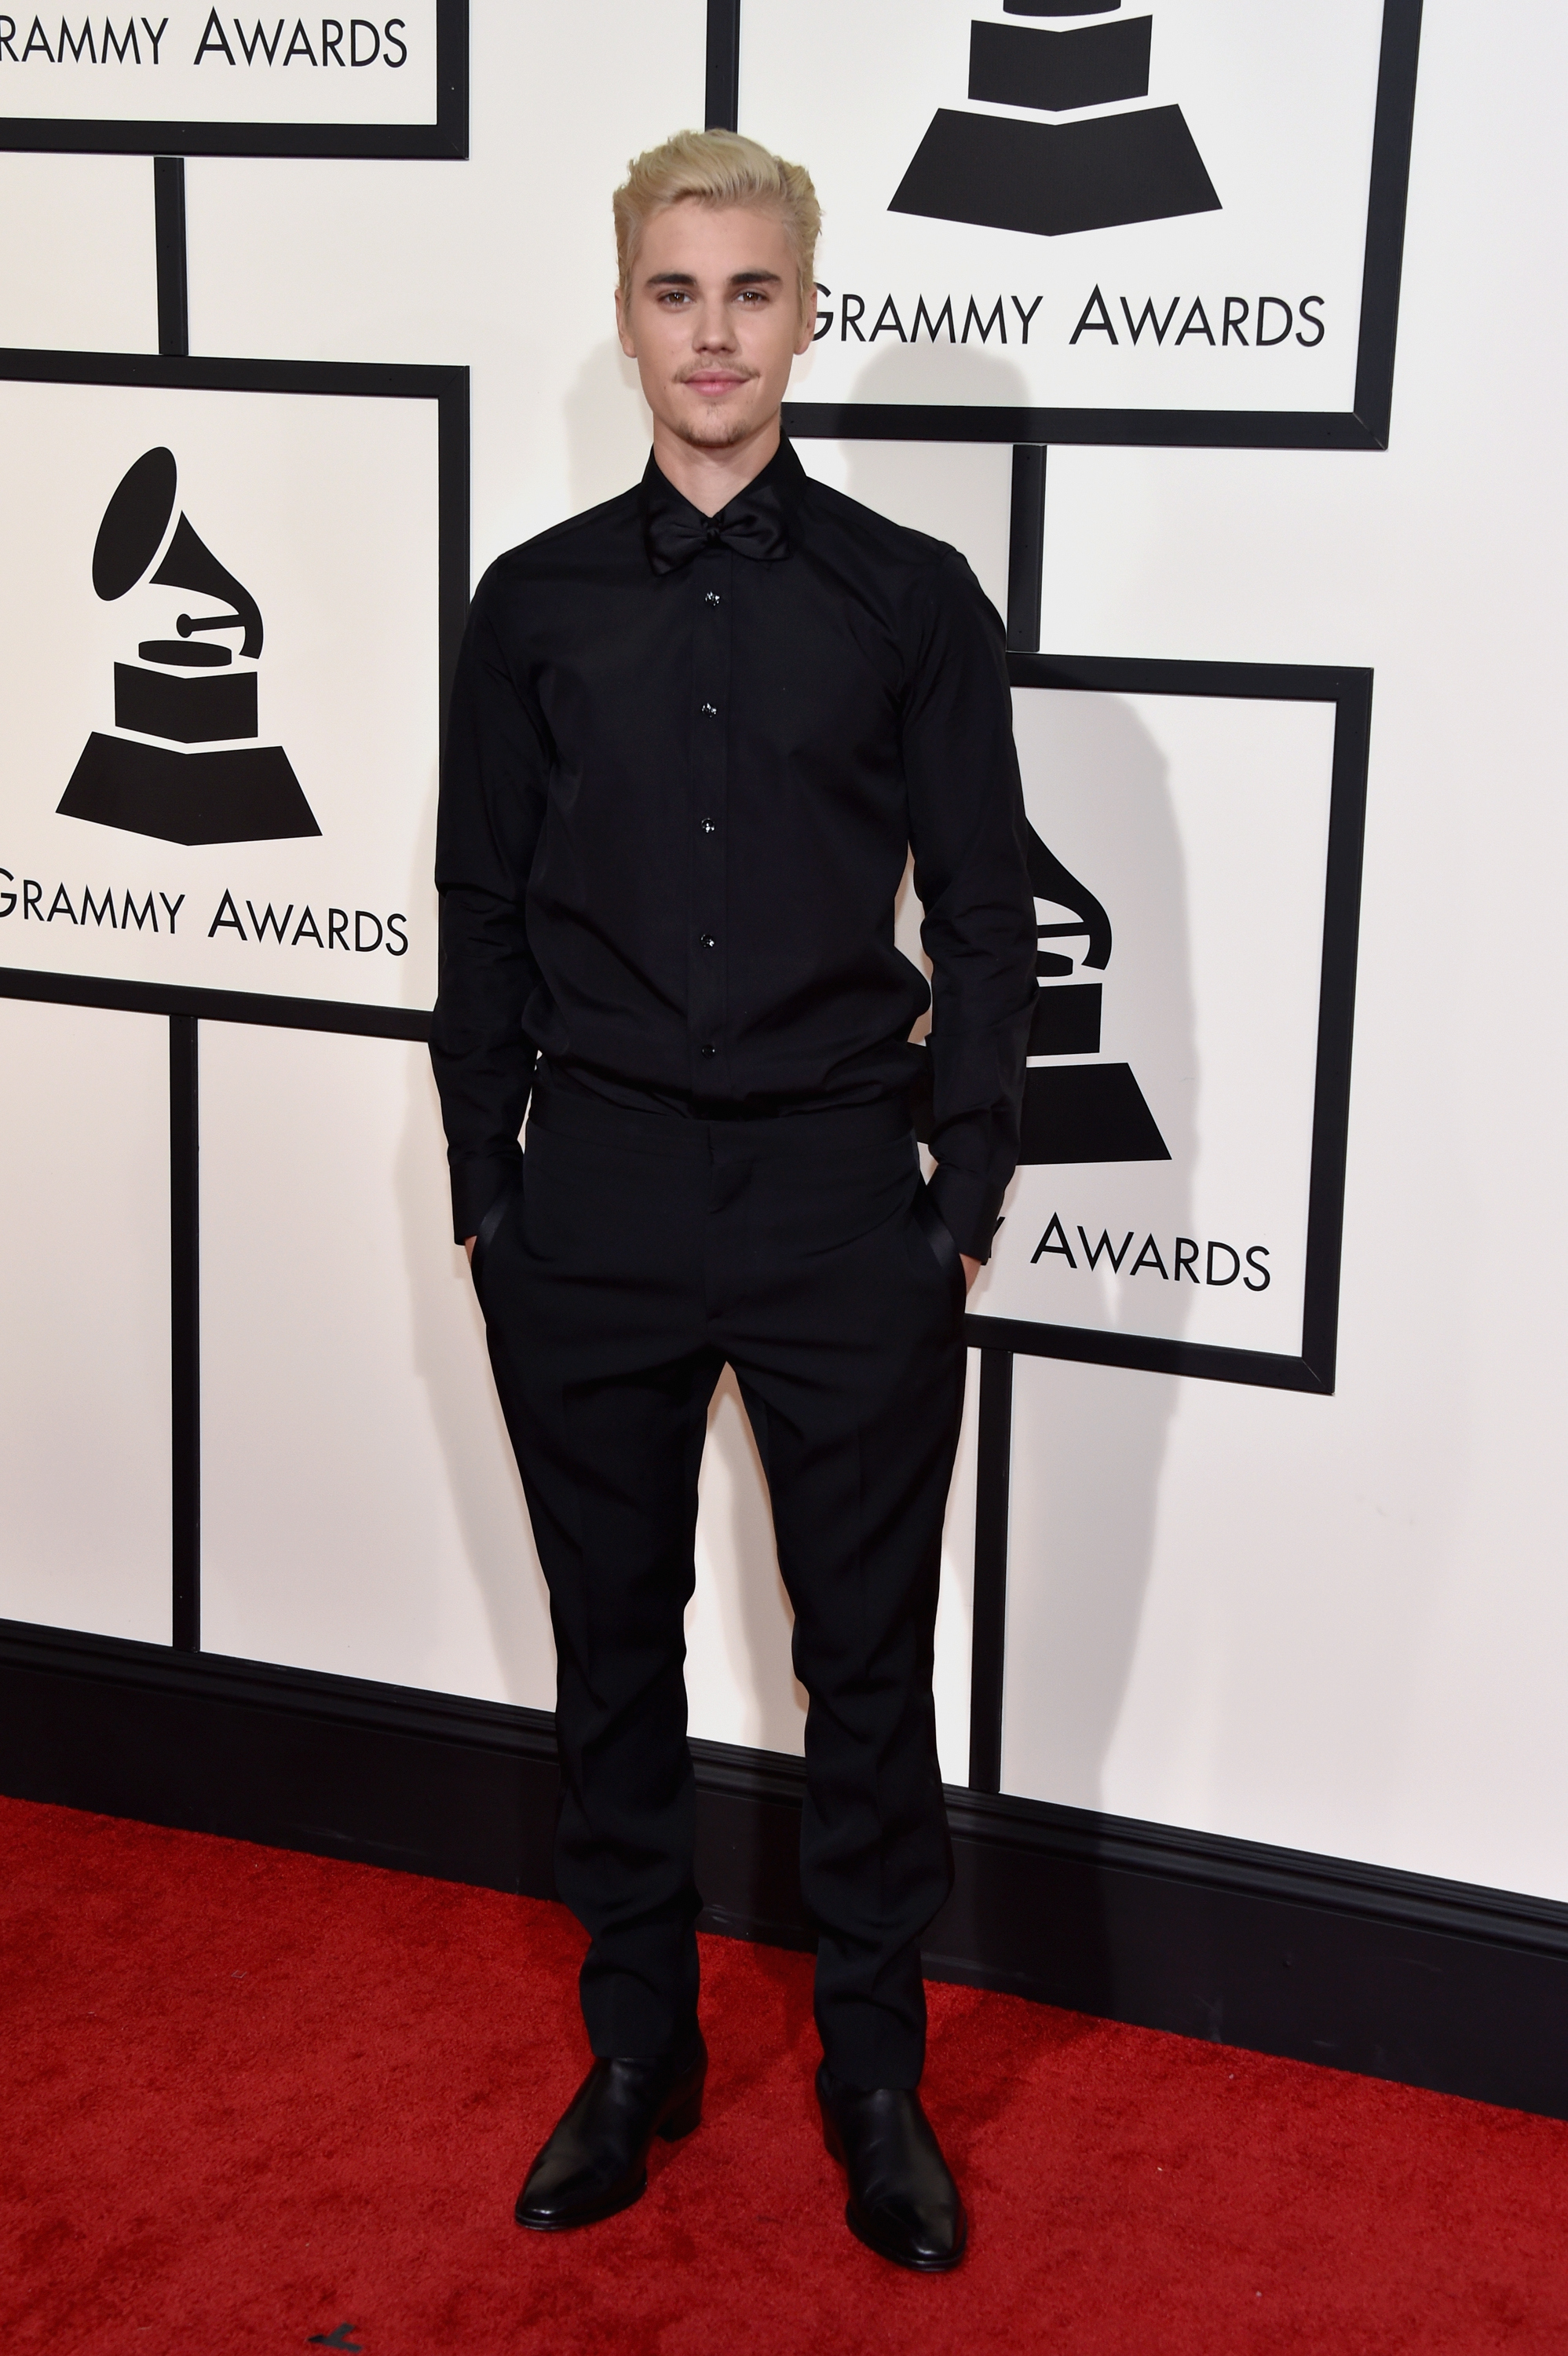 Justin Bieber attends the 58th GRAMMY Awards at Staples Center on Feb. 15, 2016 in Los Angeles.